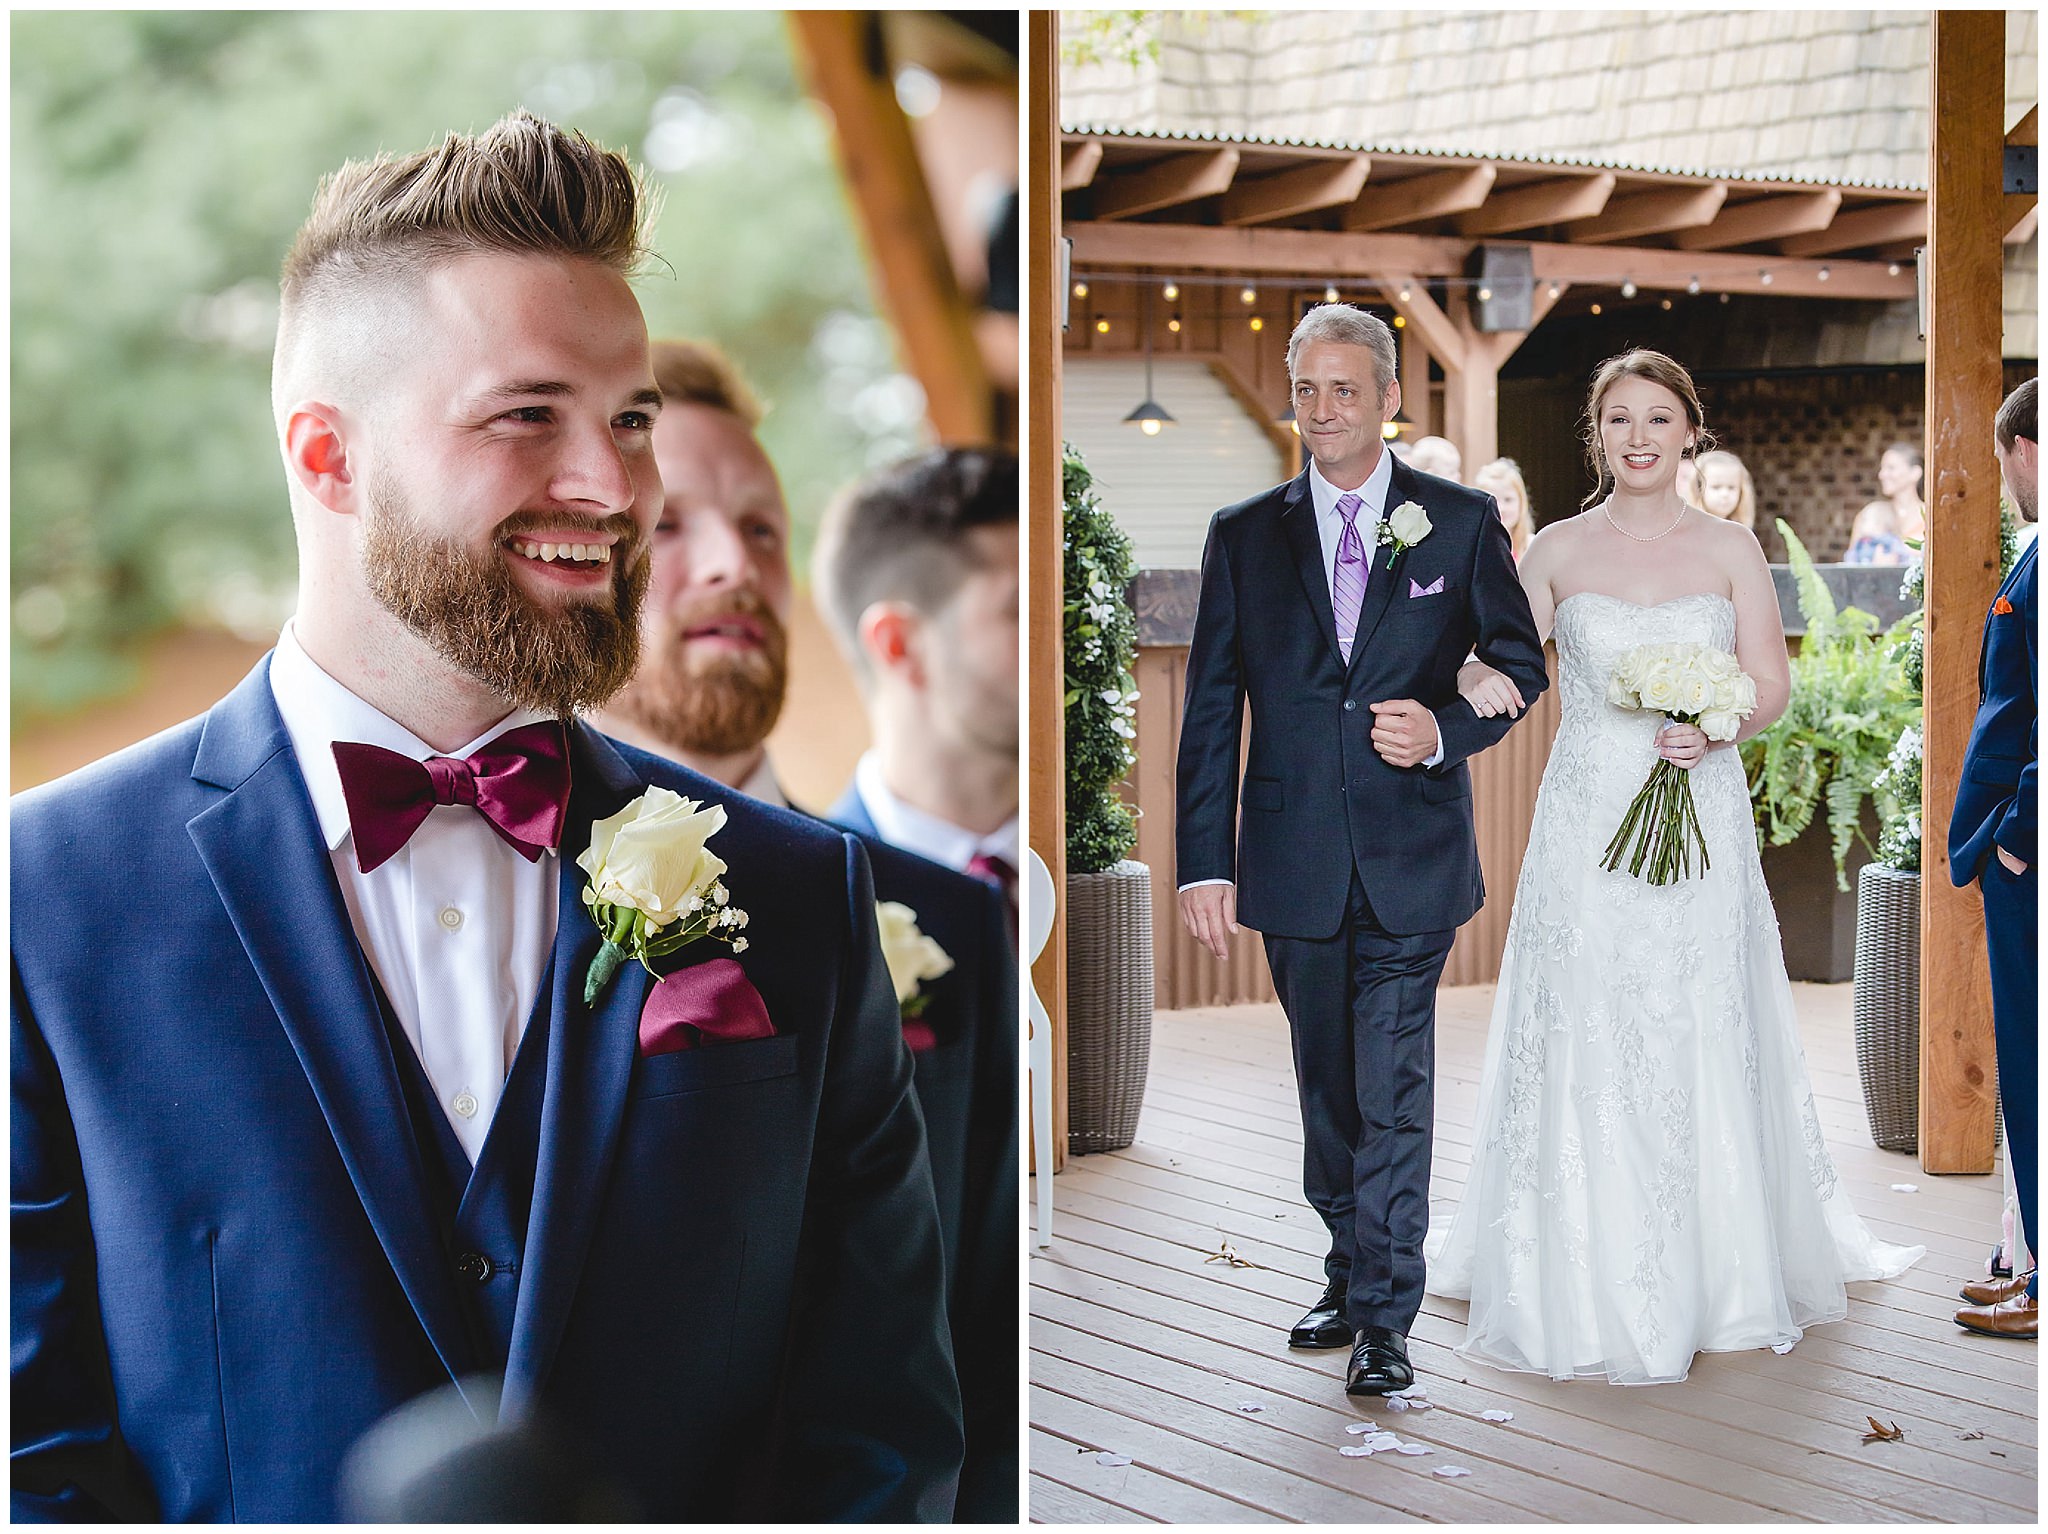 Groom smiles as bride walks down the aisle at the Chadwick